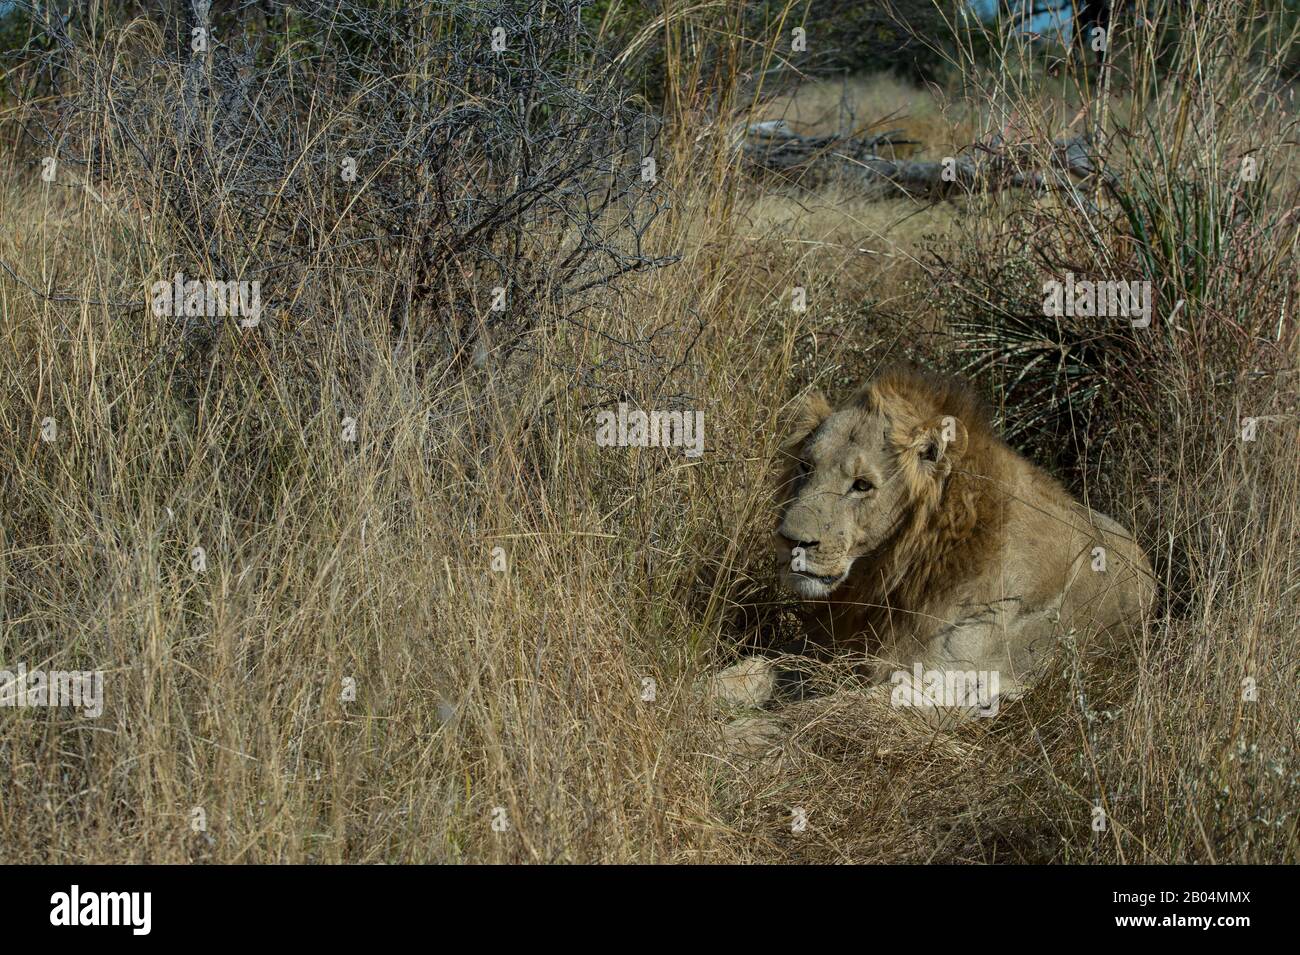 Male Lion (Panthera leo) in grass in the Chitabe area of the Okavango Delta in the northern part of Botswana. Stock Photo